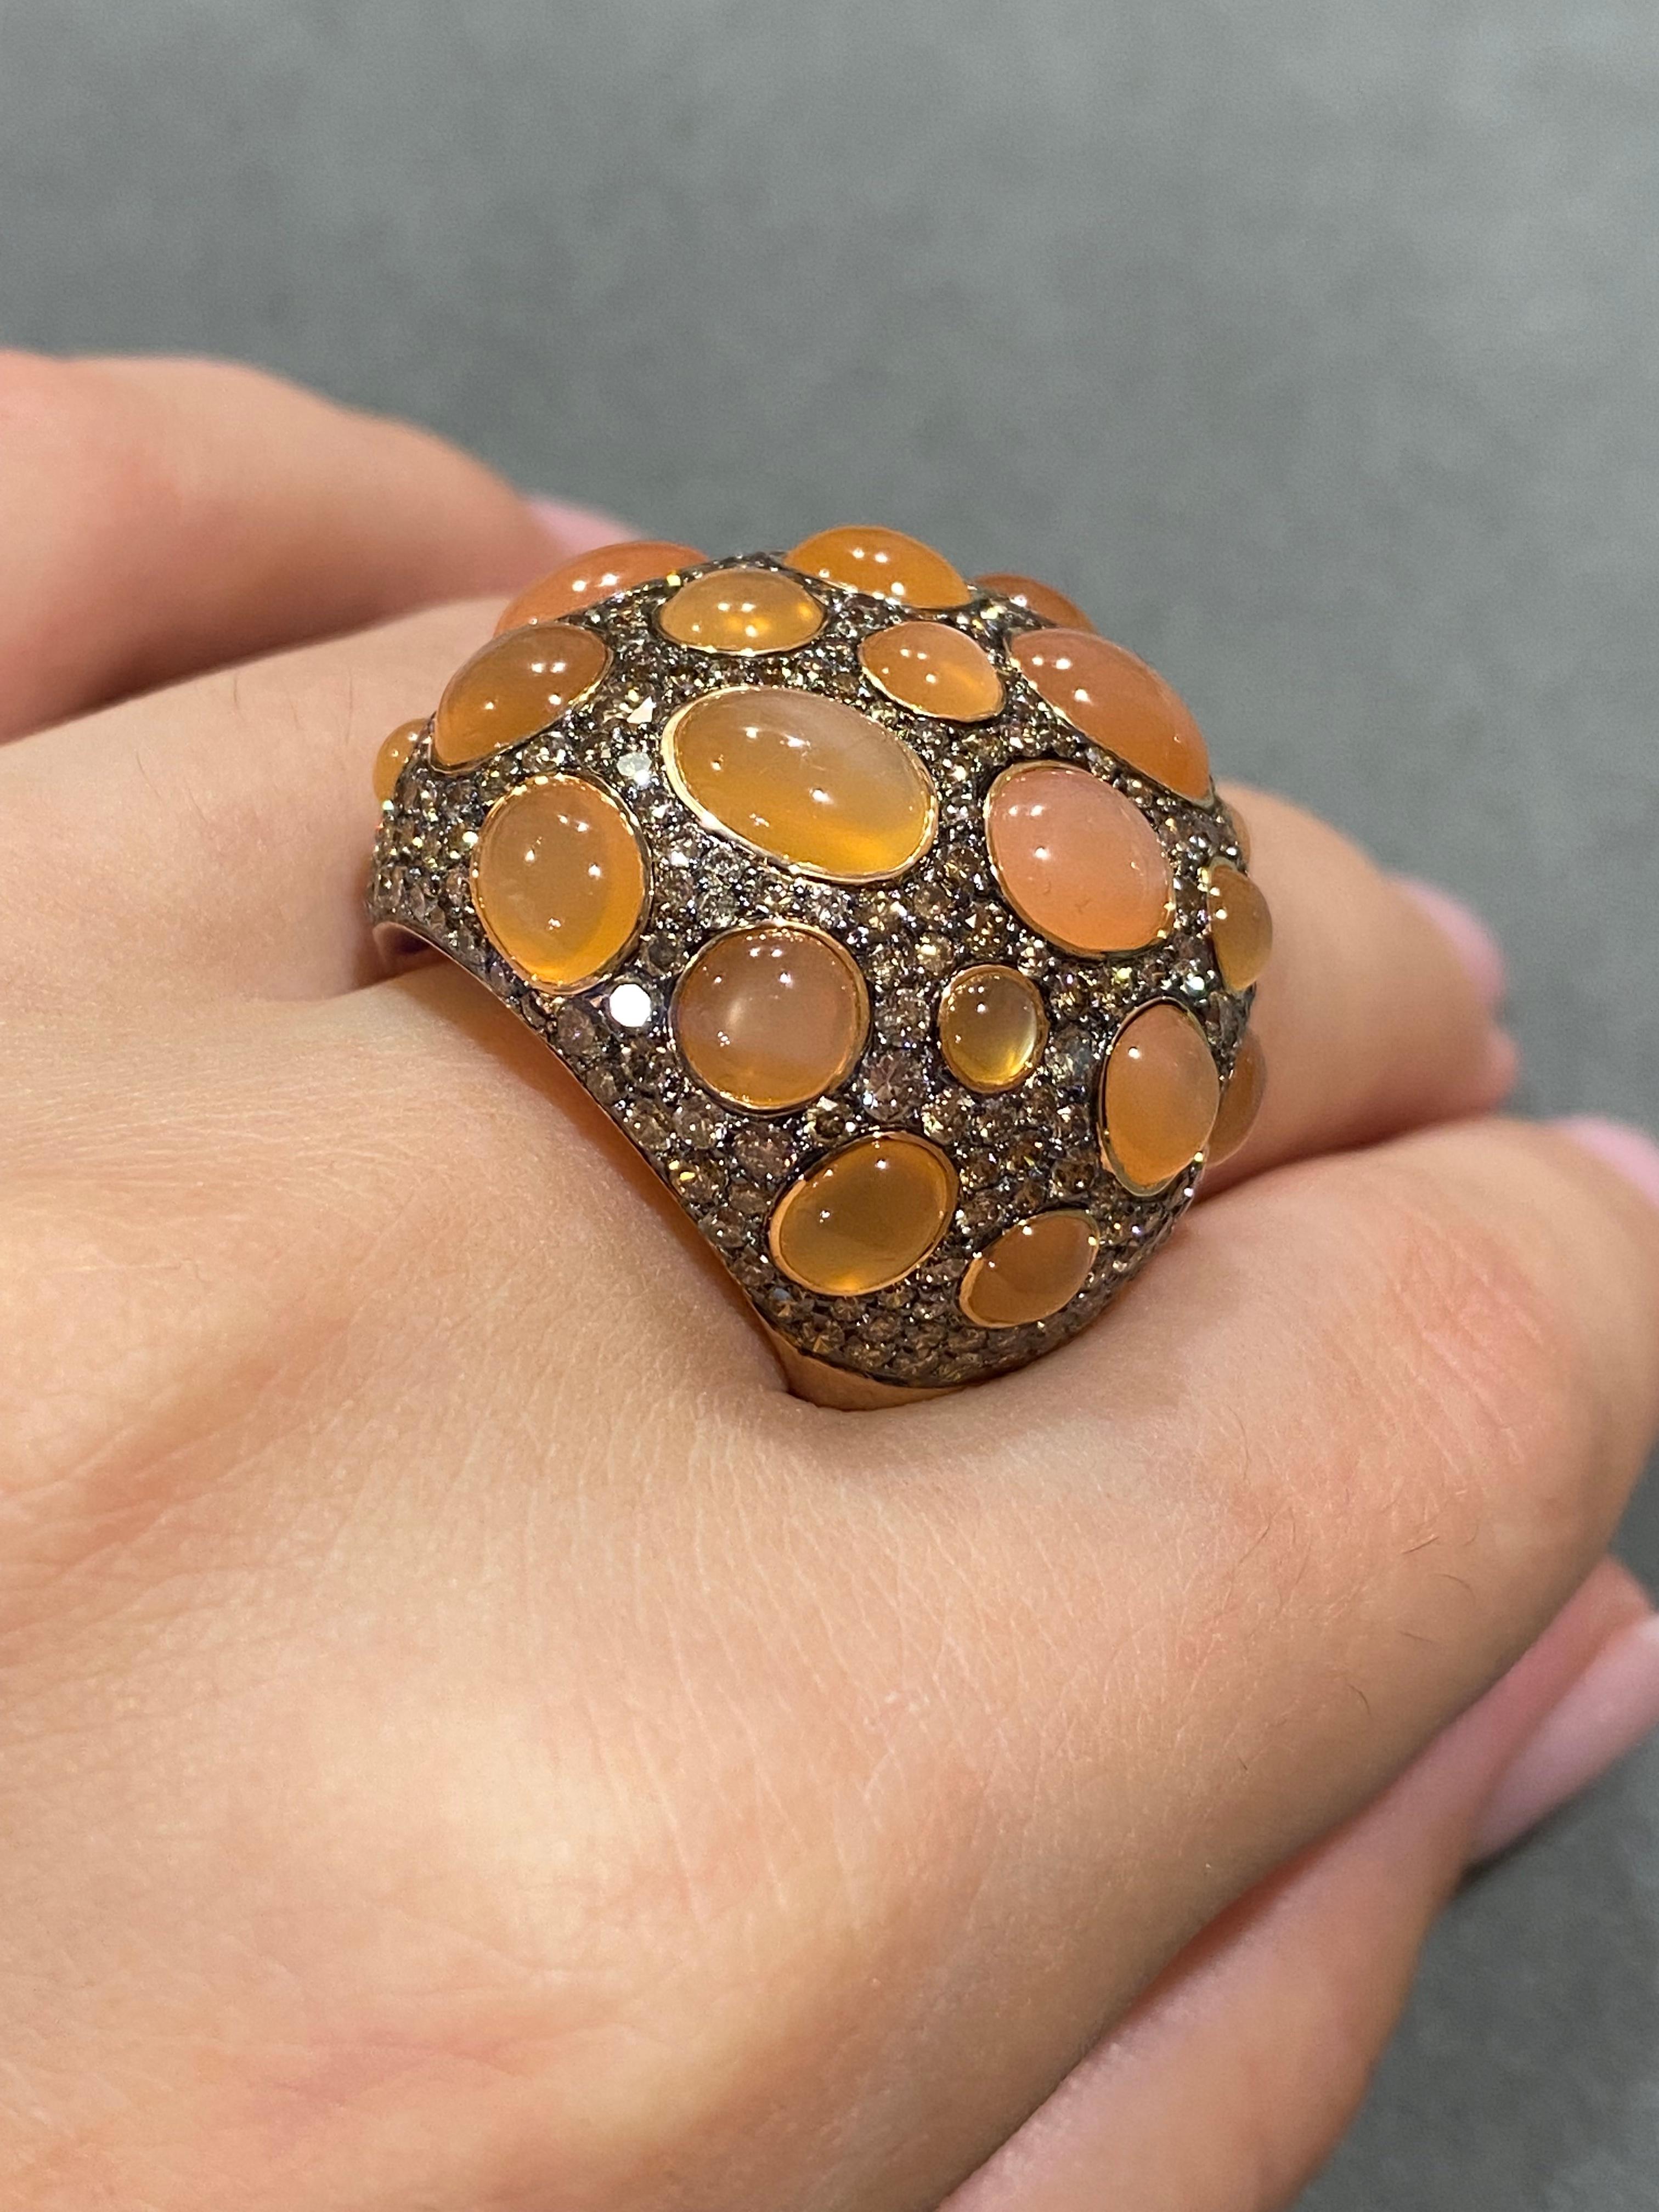 Round Cut Rare Cognac Diamonds Citrine Yellow 18K Gold Ring for Her For Sale